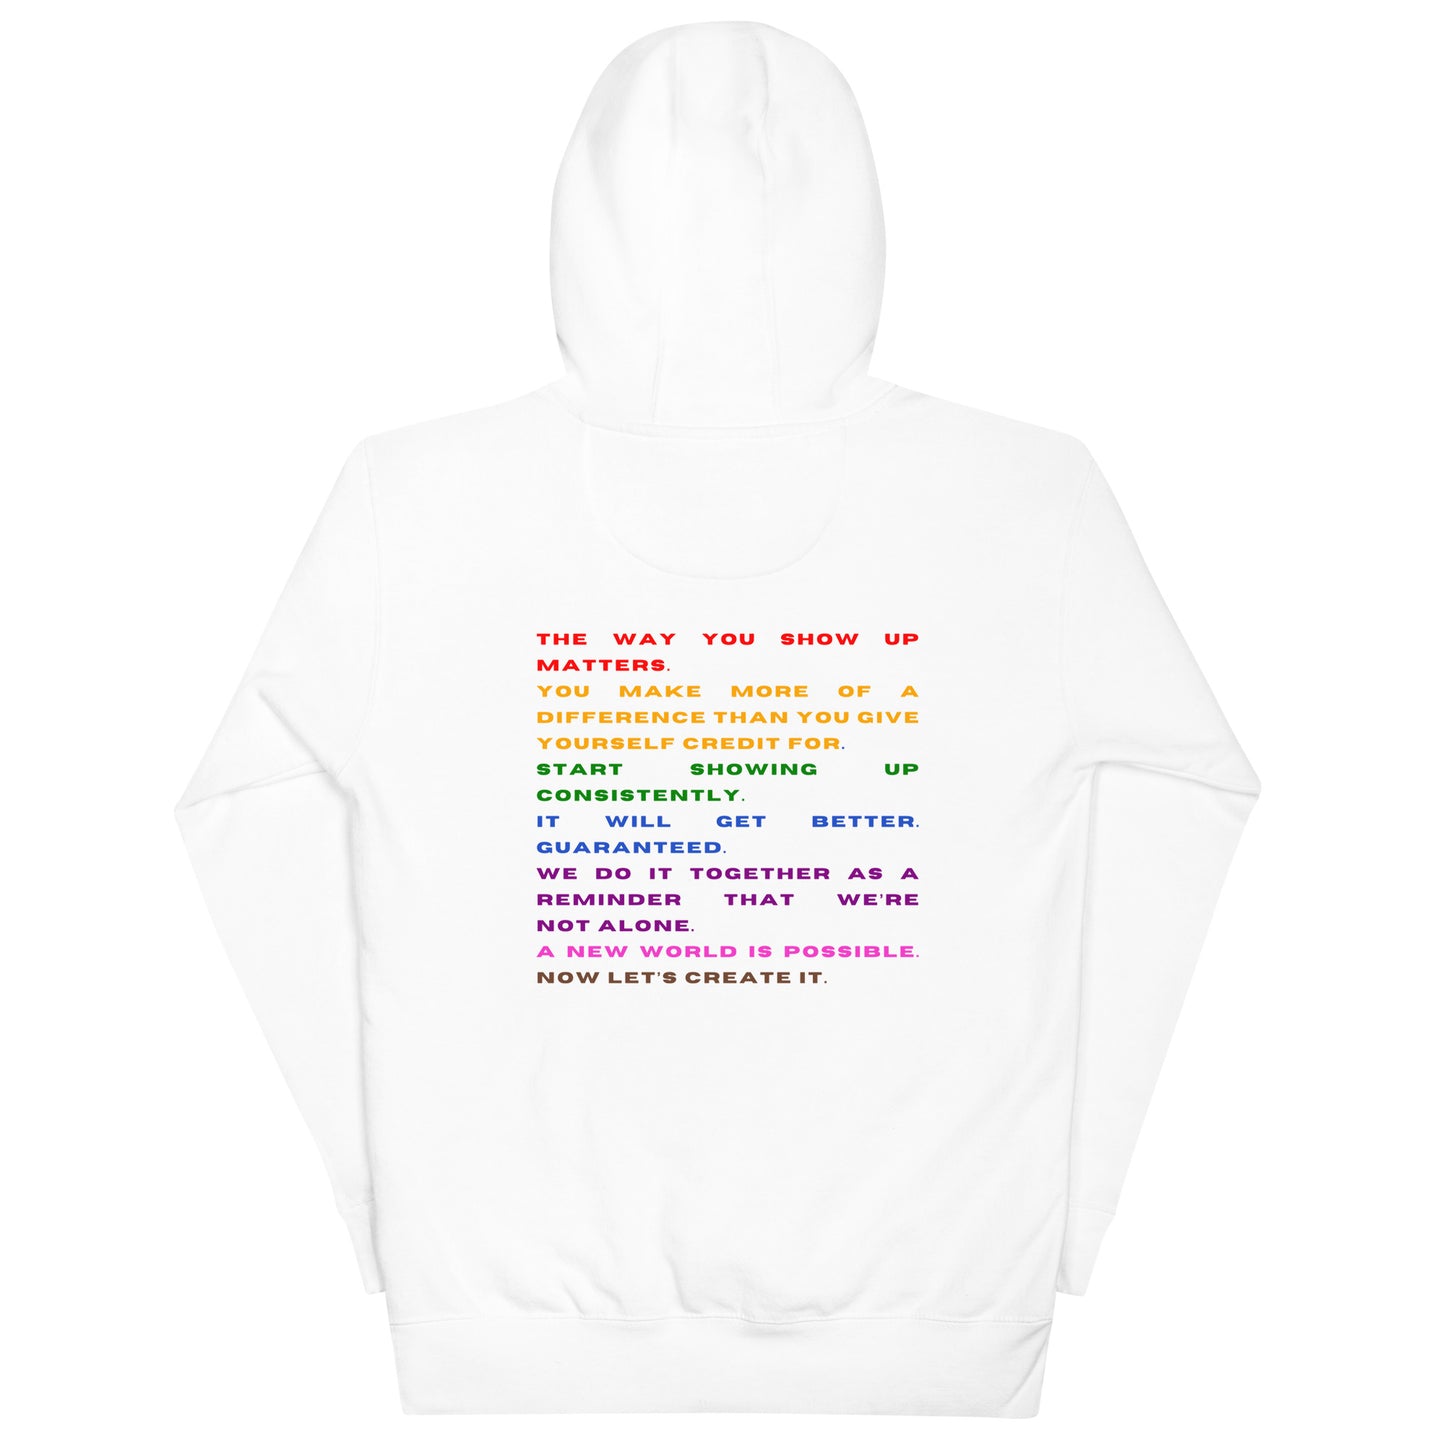 *it can be better* - rainbow - Unisex Hoodie